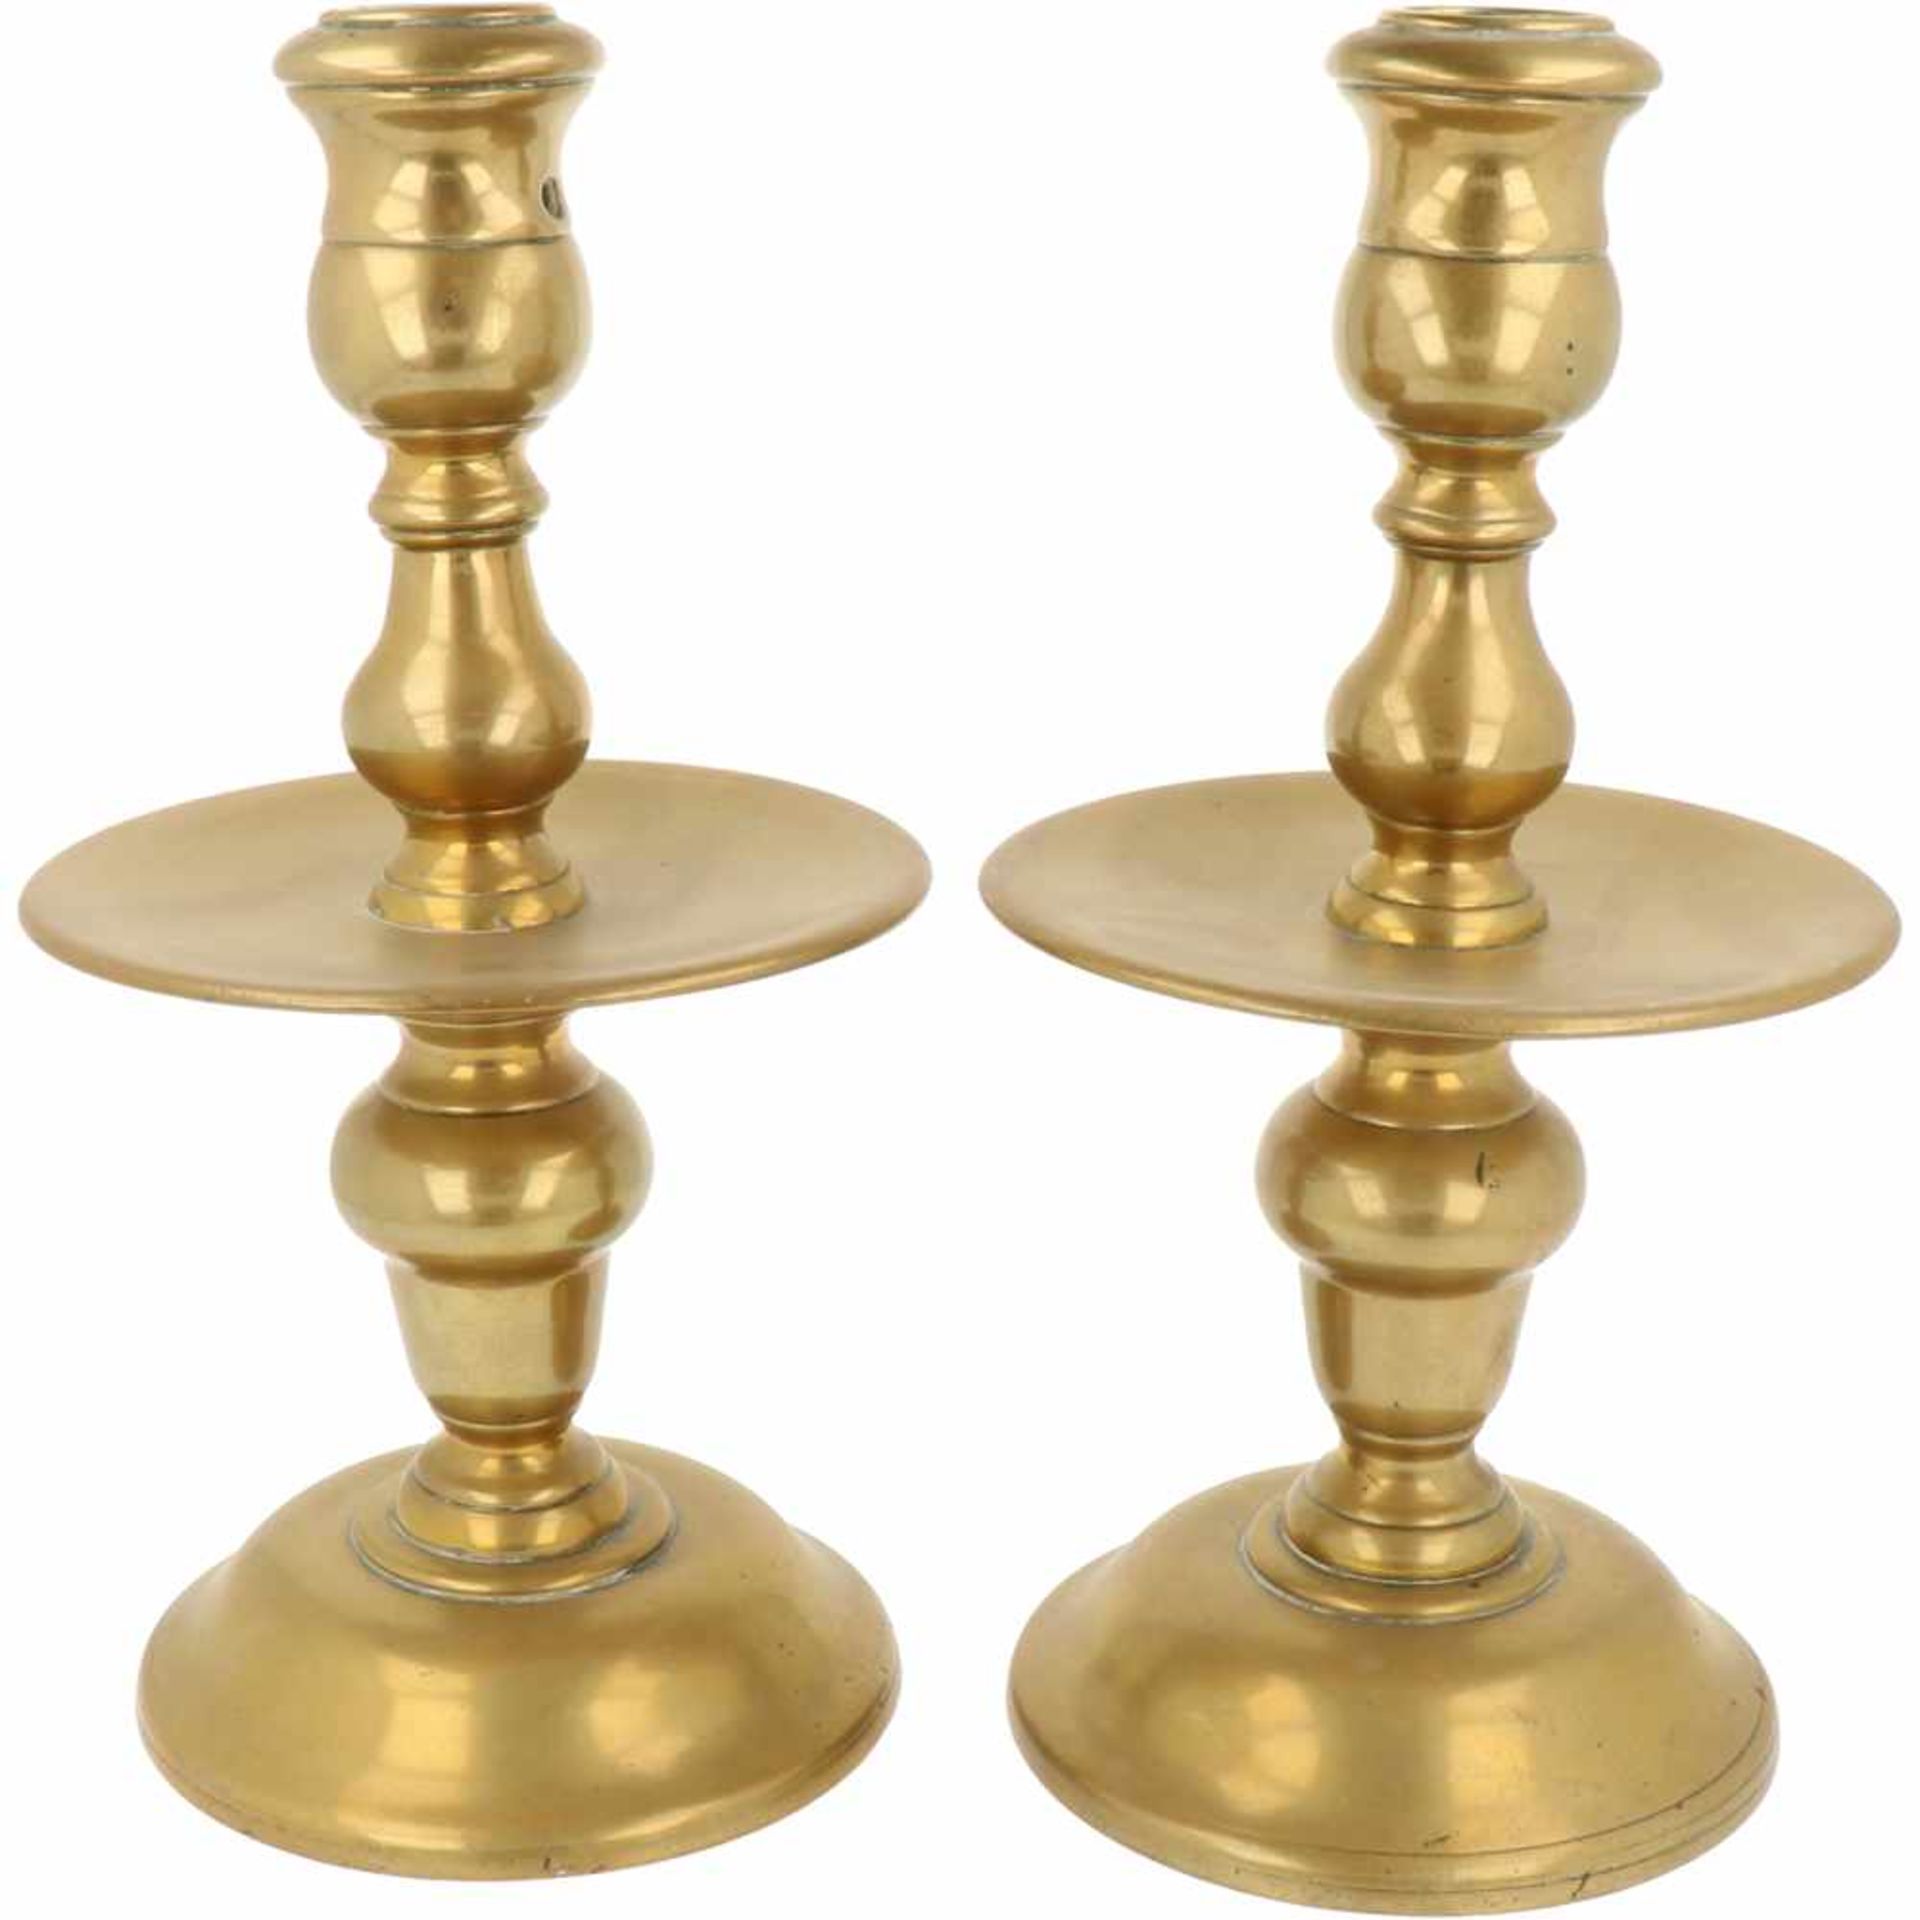 A set with (2) disc candles. Ca. 1800.